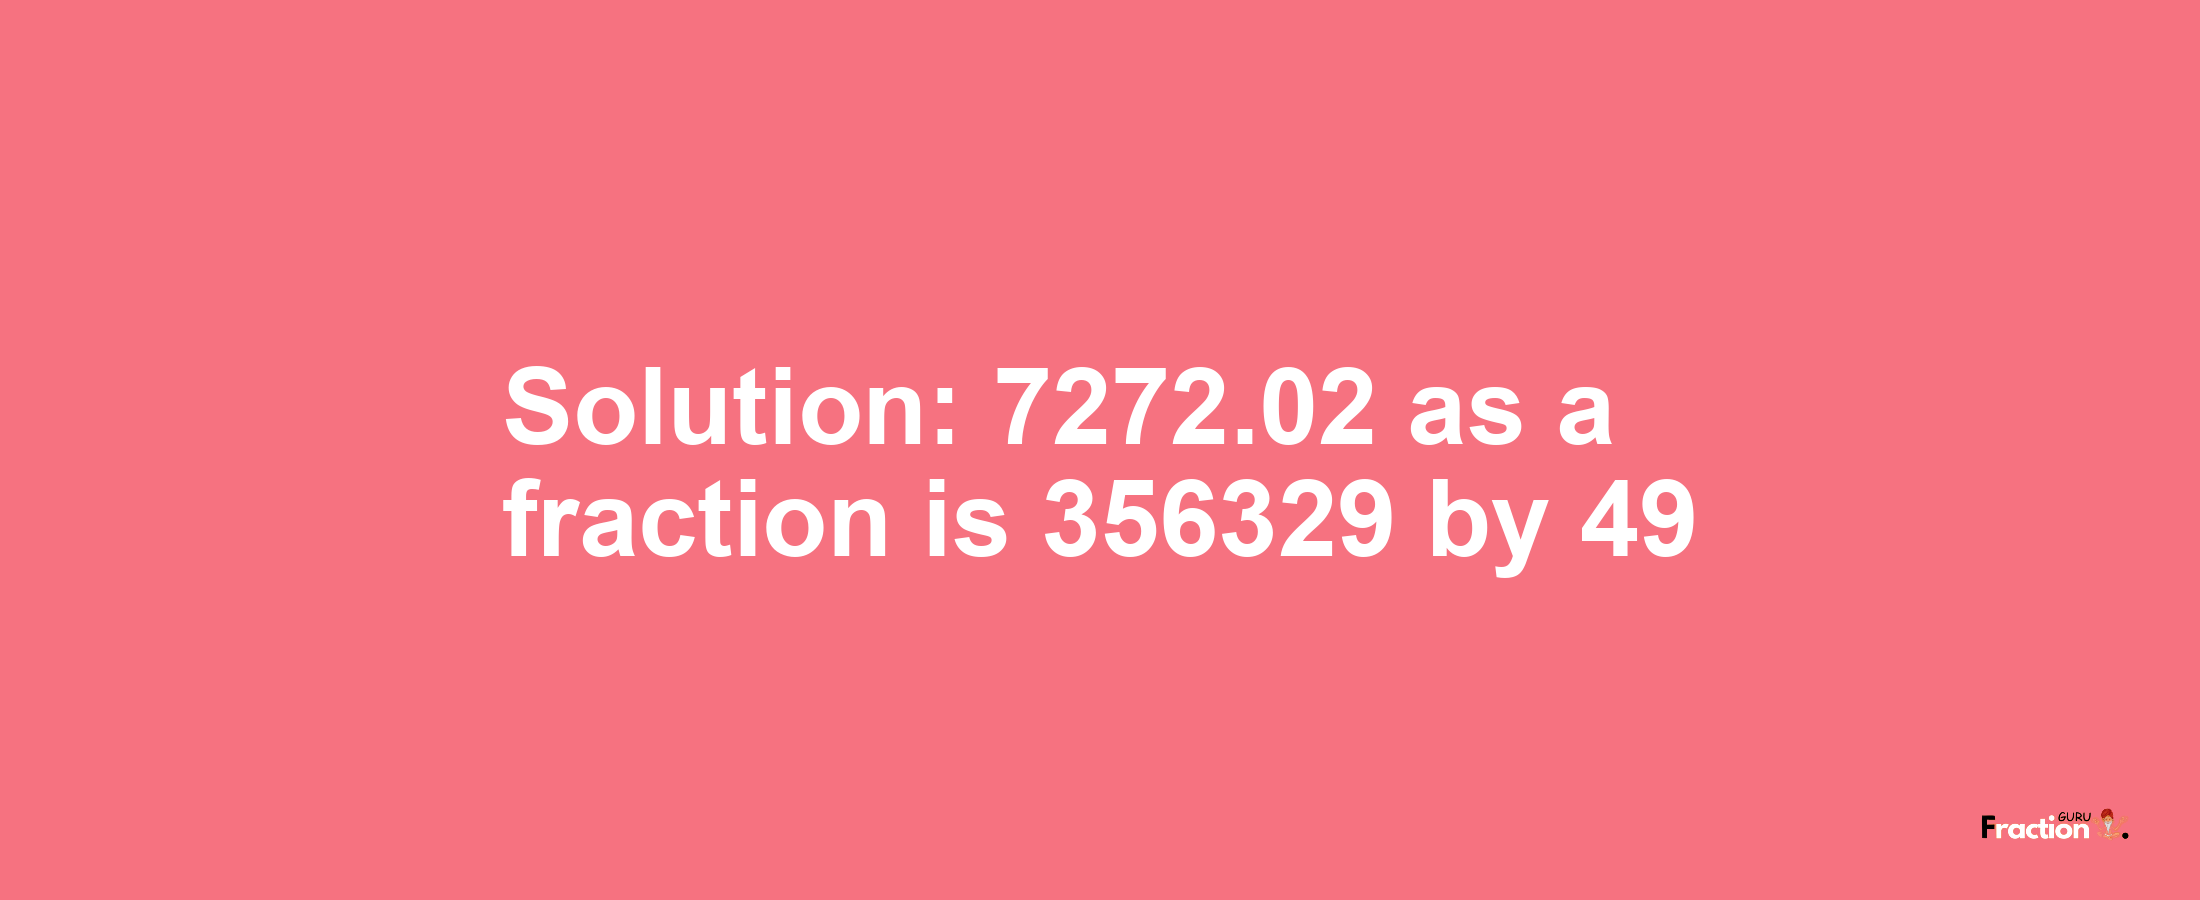 Solution:7272.02 as a fraction is 356329/49